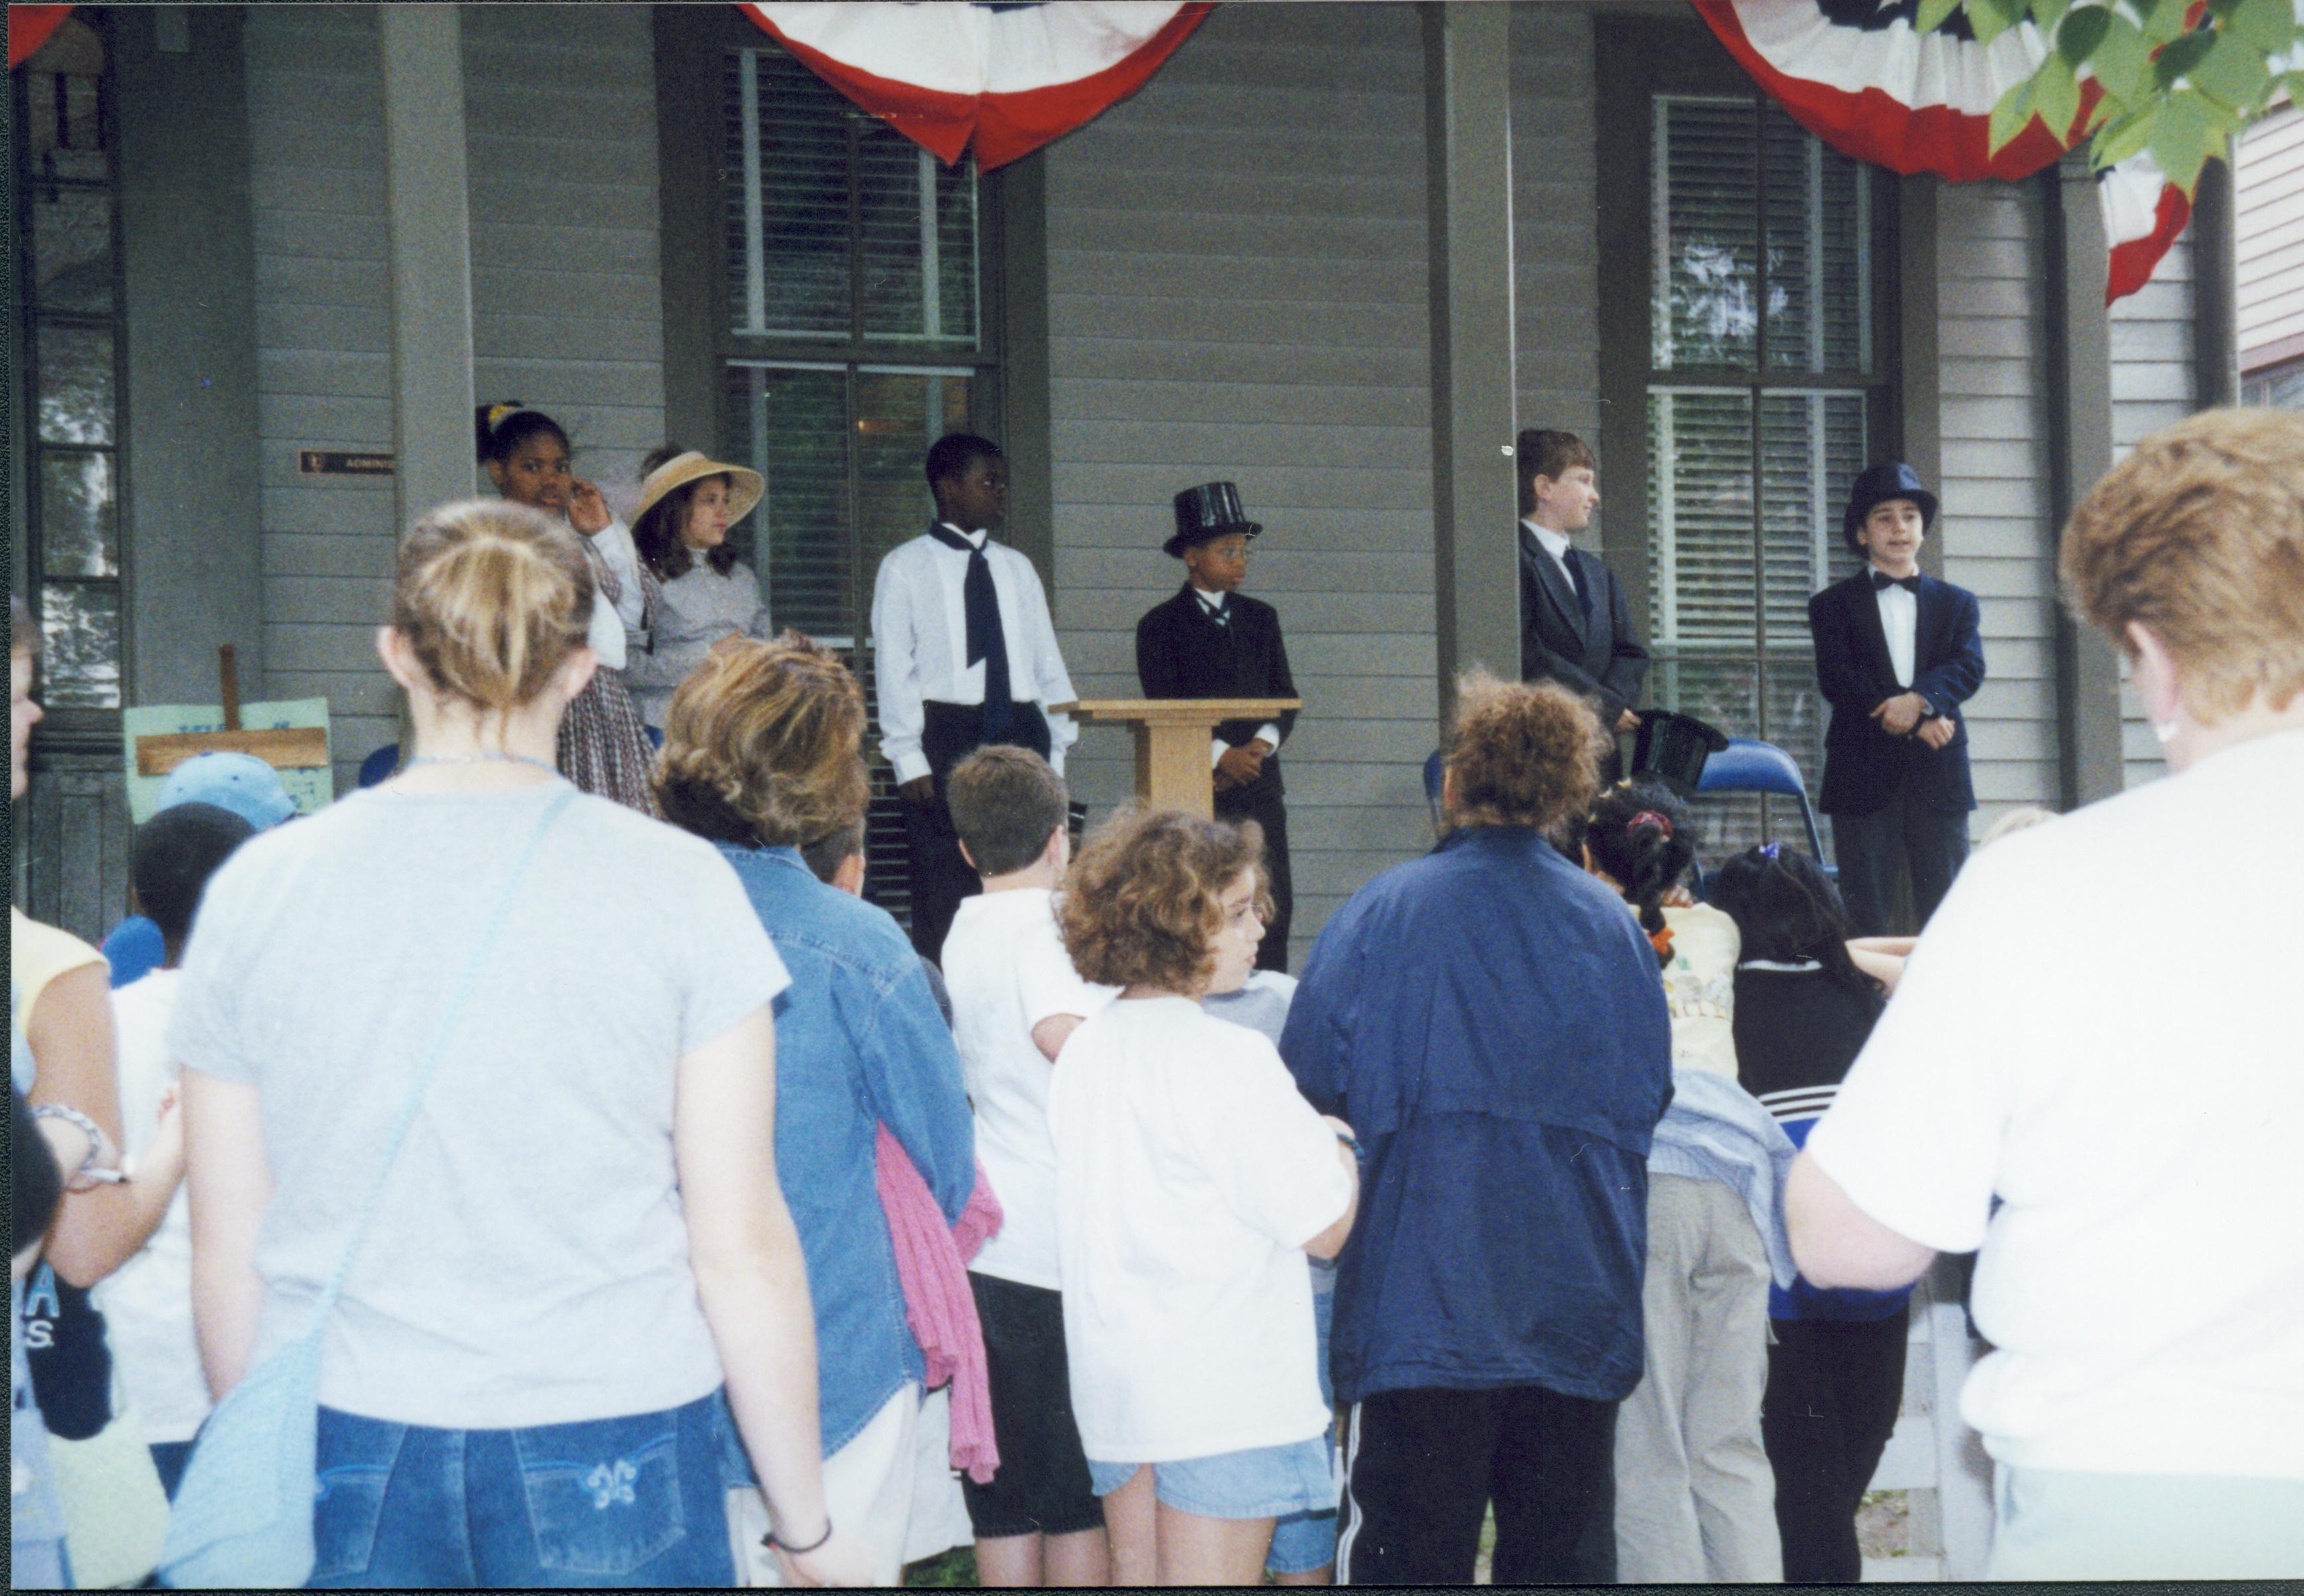 Iles School Living History program - Students portraying the Lincoln-Douglas debates on the Lyon House porch while school groups and parents watch. Looking West from 8th Street Iles School, living history, Lincoln-Douglas debates, students, school groups, Lyon